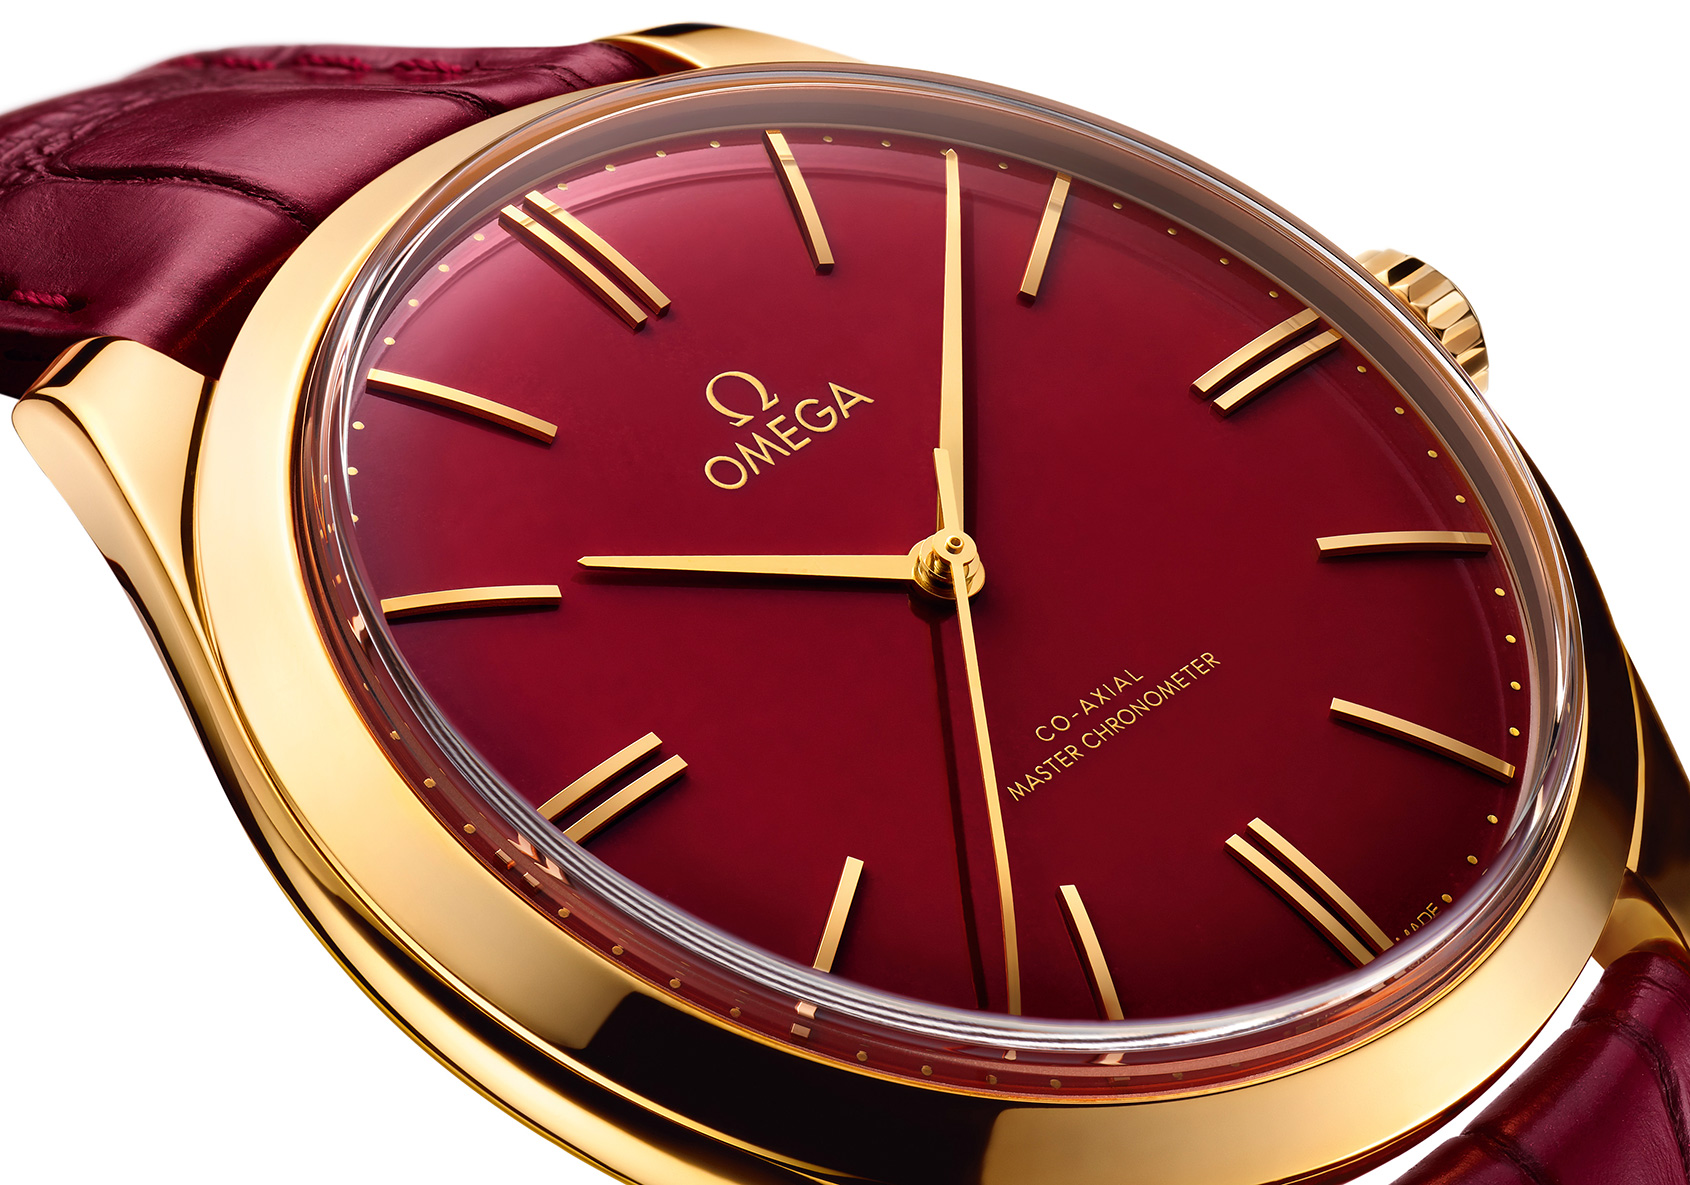 Introducing A Vision In Red The Brand New Omega De Ville Tresor 125th Anniversary Special Edition Time And Tide Watches